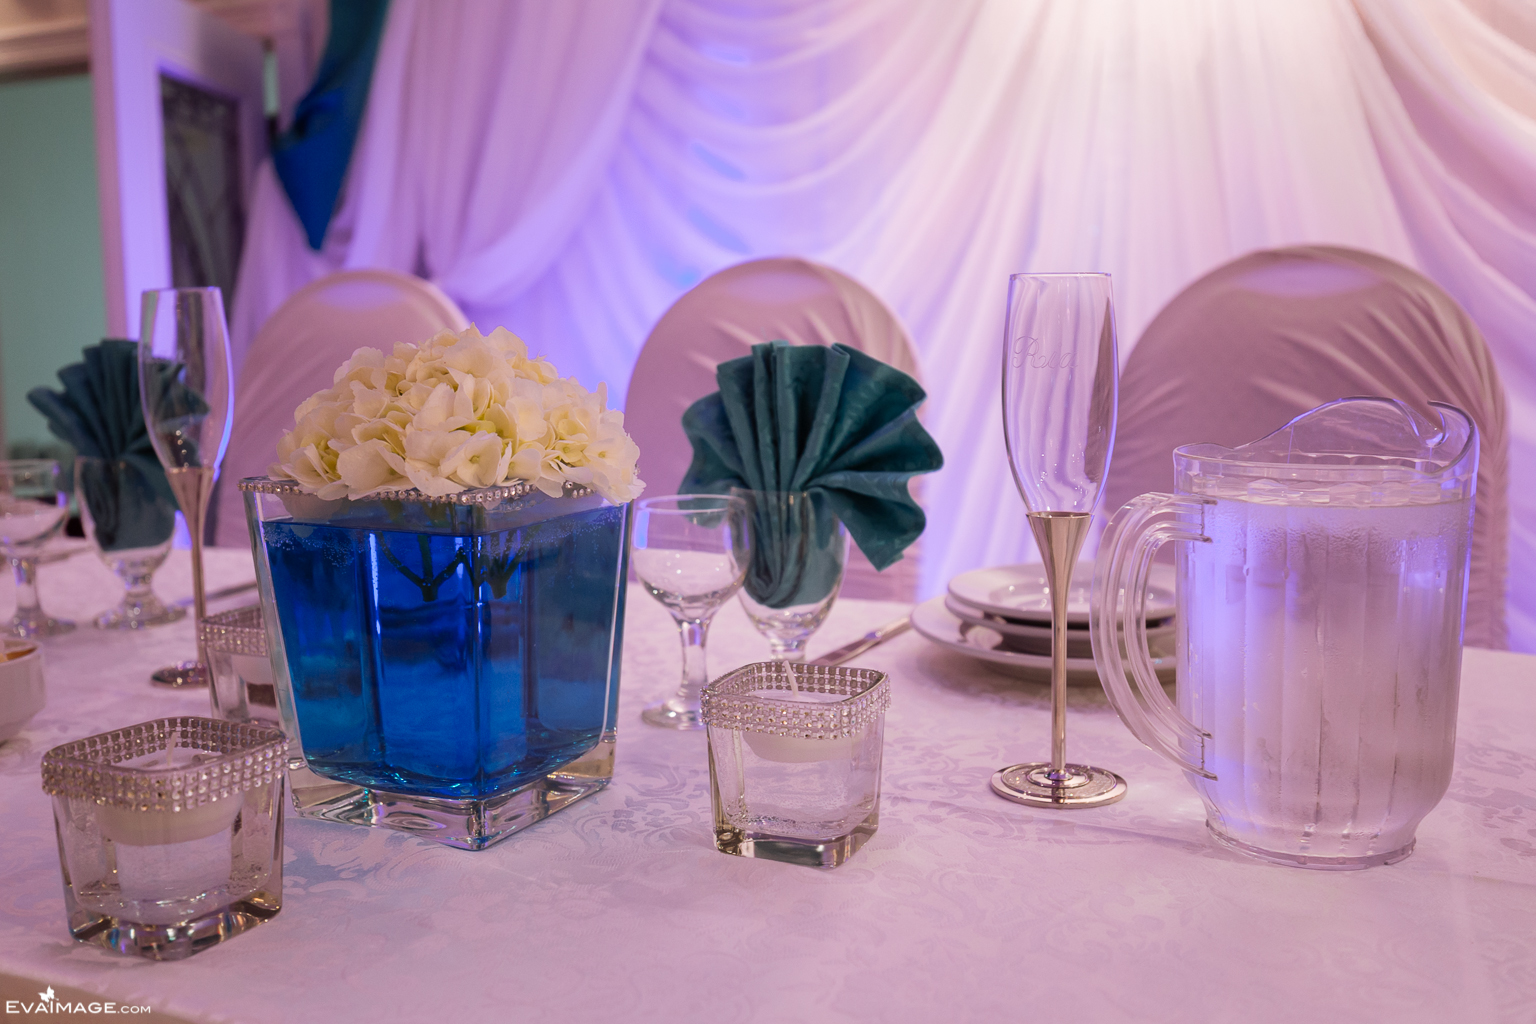  Maple Banquet Hall Mississauga Wedding Reception. Ria & Brian, May 16, 2015. By EvaImage Photography 